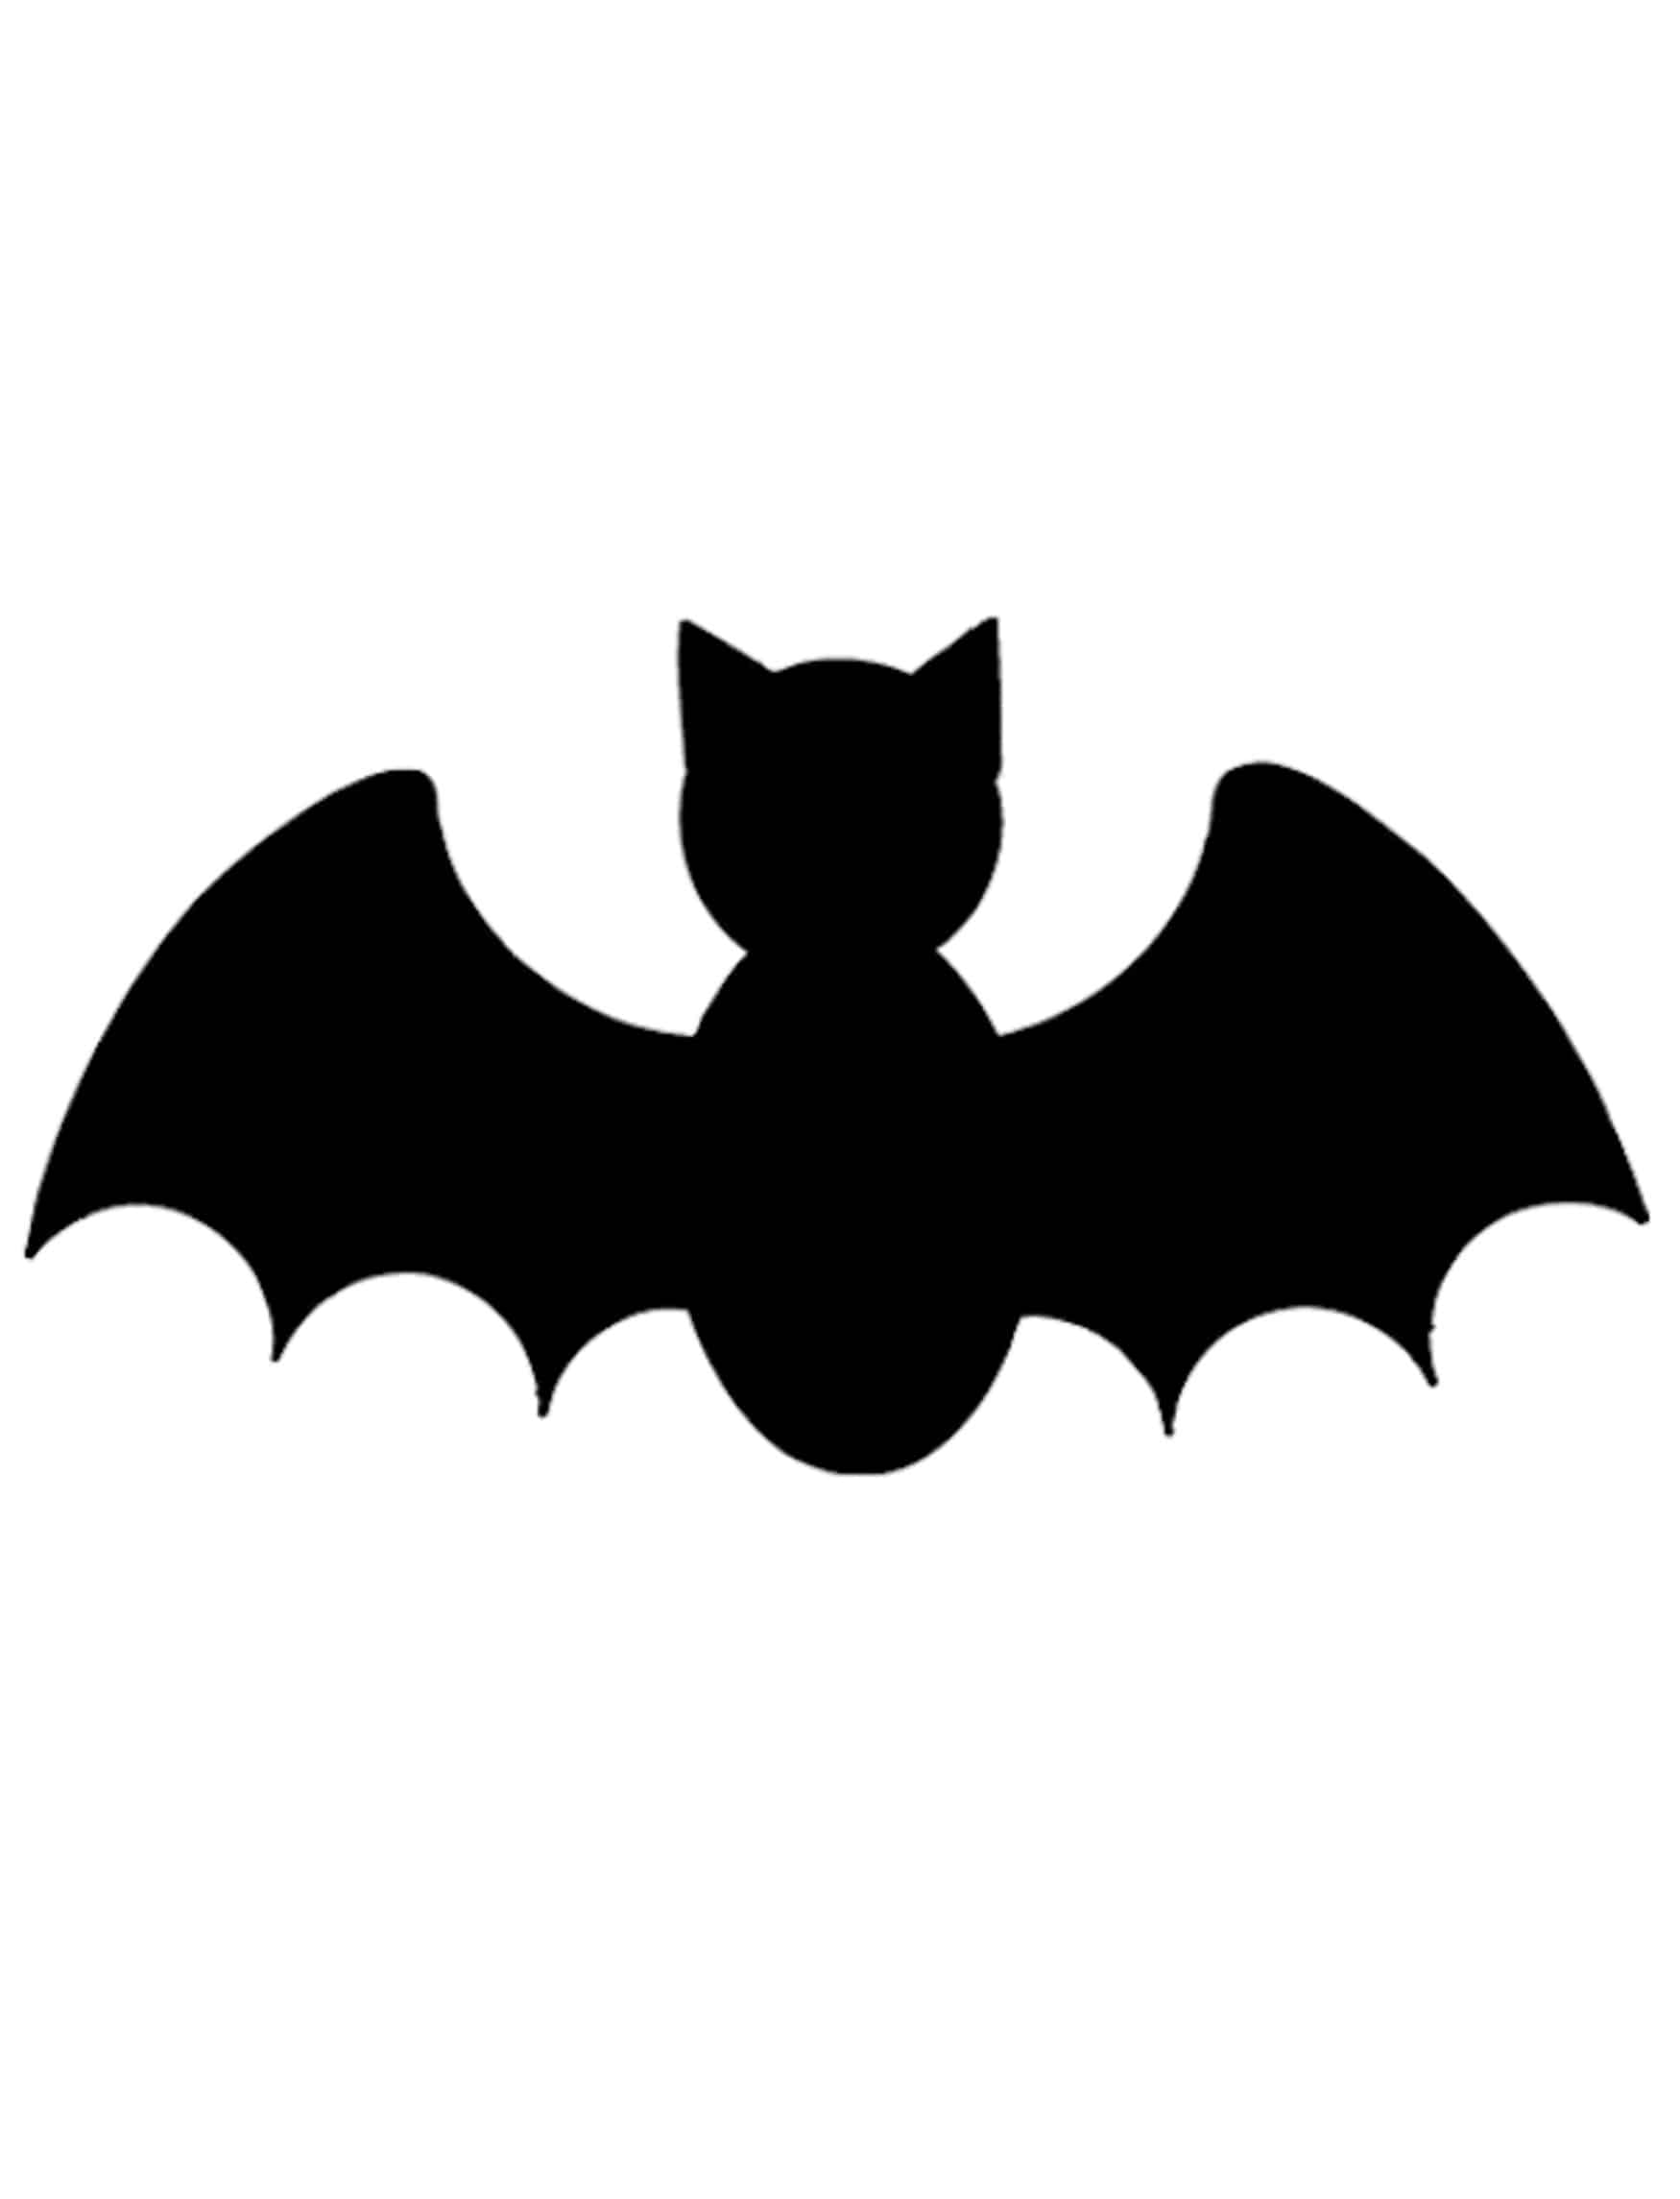 Simple Bat Pumpkin Carving Pattern Creative Ads and more…